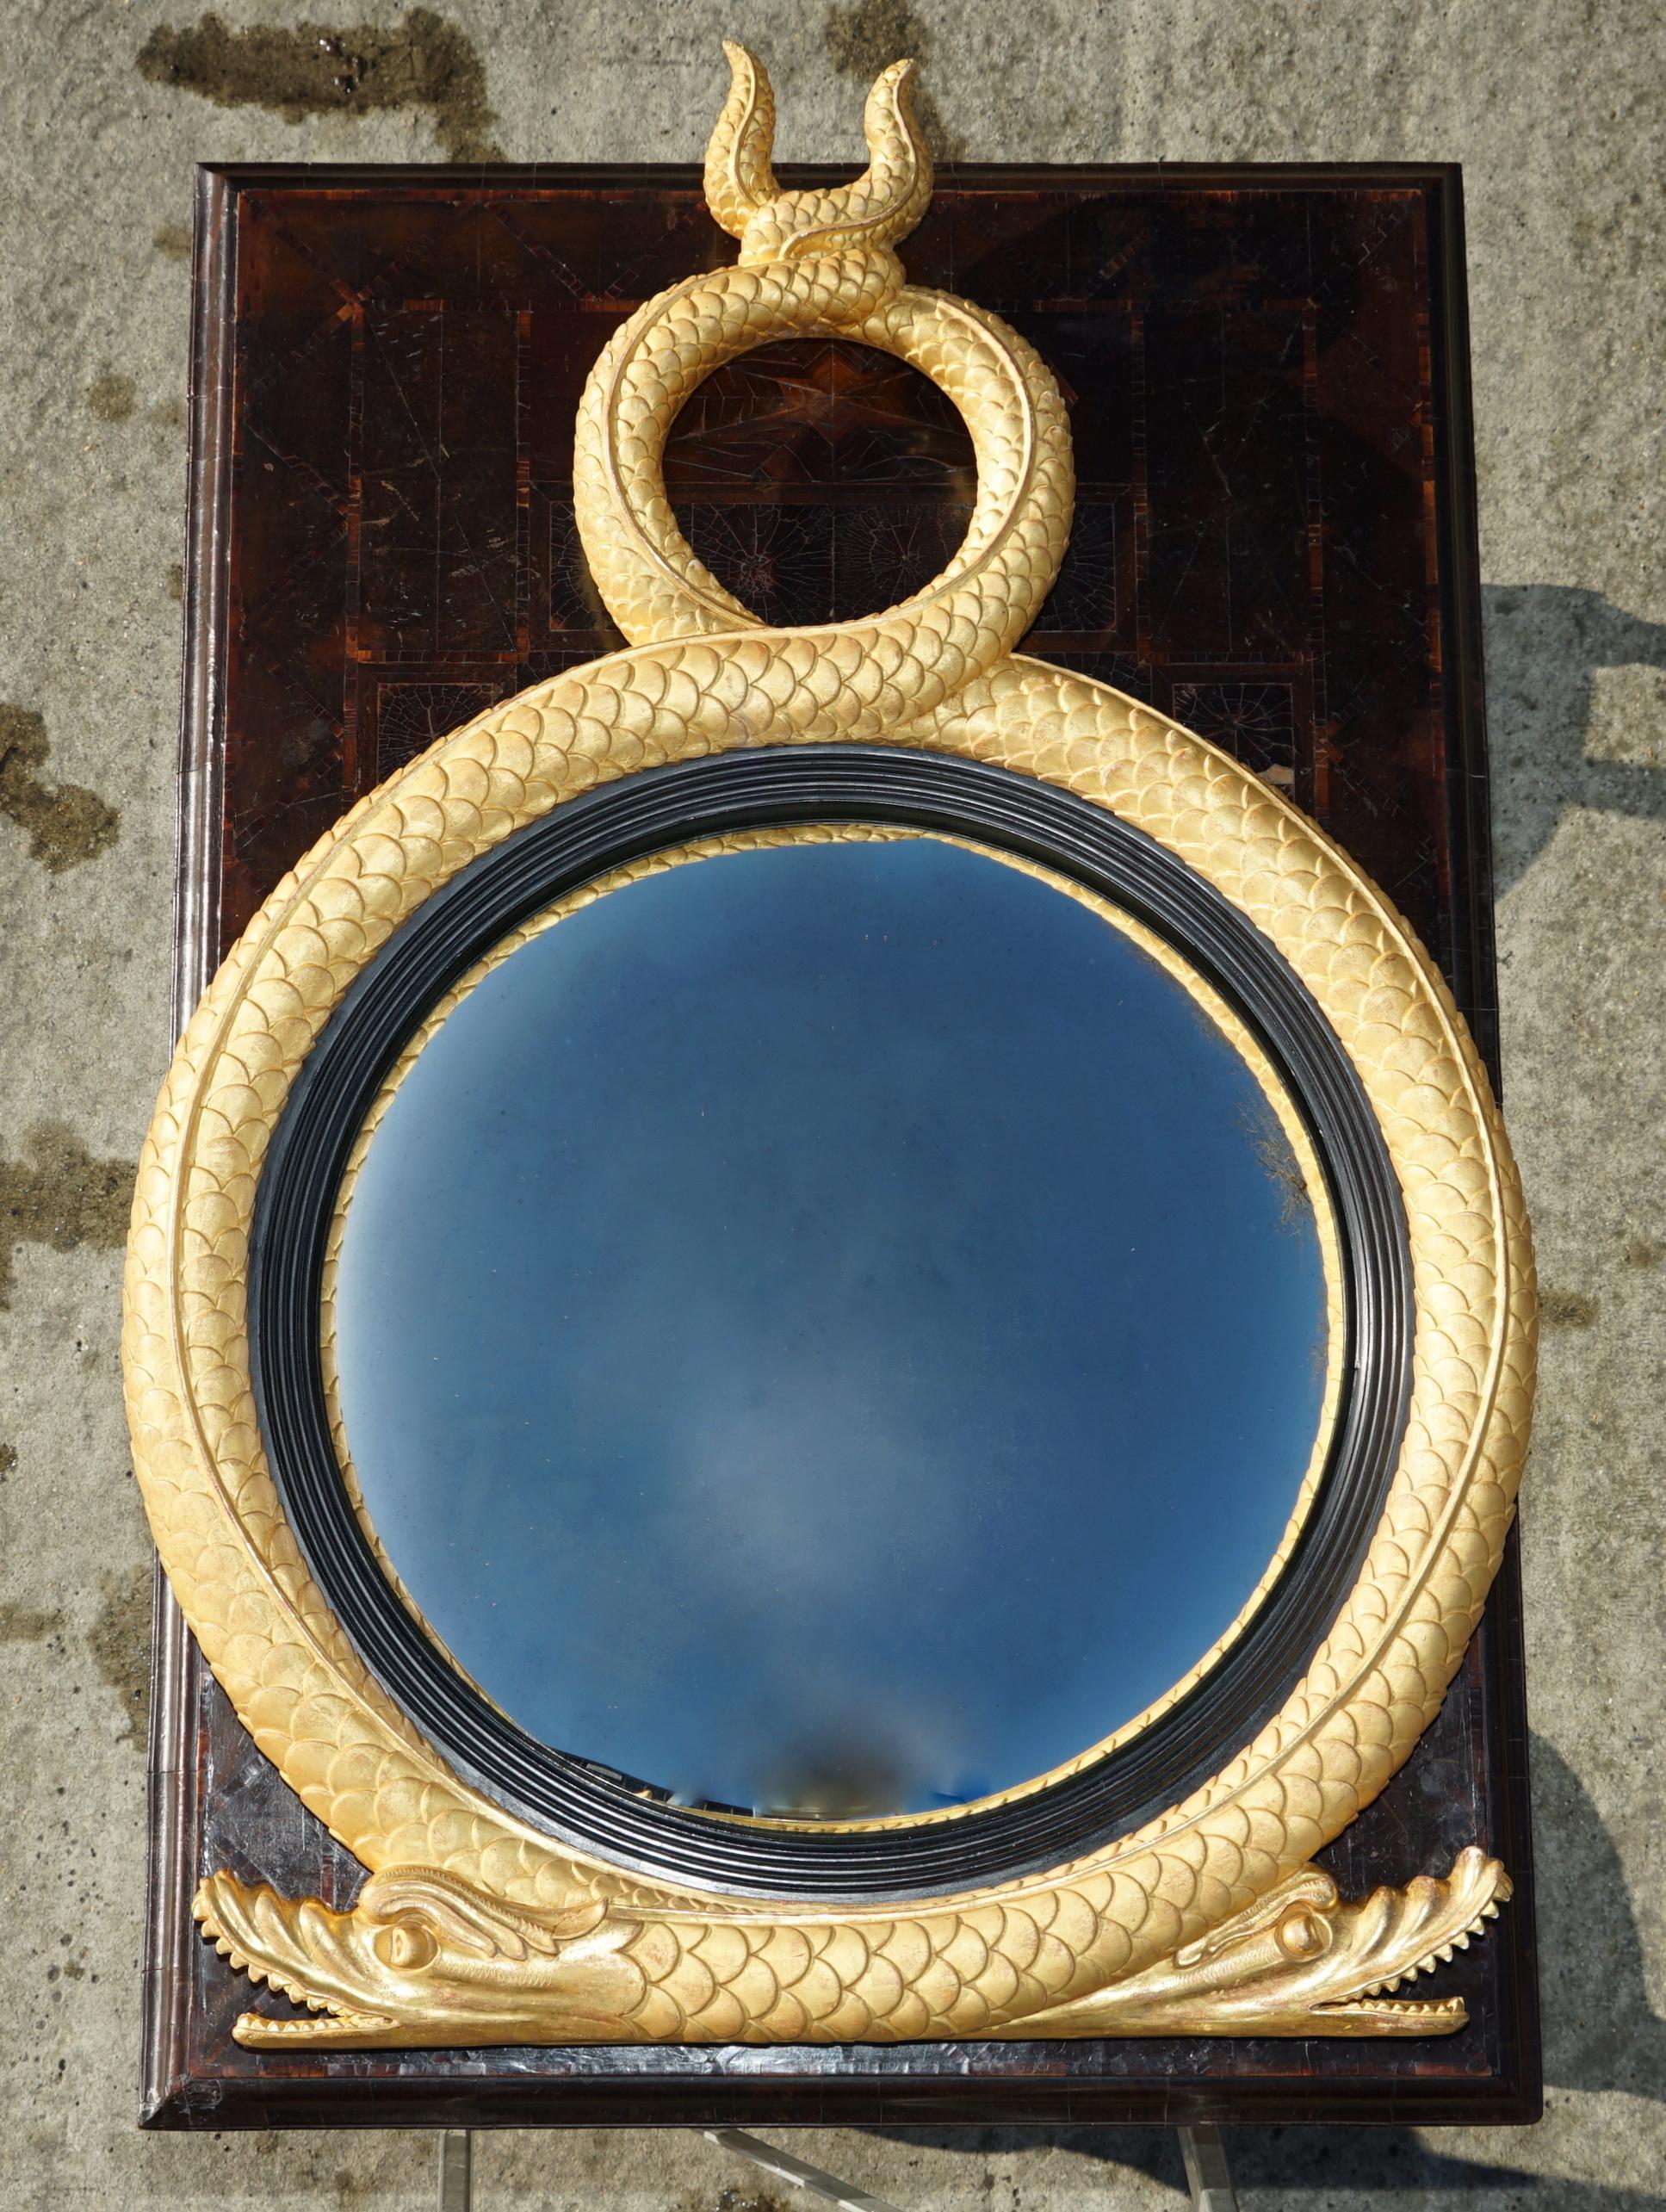 PAIR OF EXTRA LARGE STUNNING REGENCY STYLE GOLD GILT TWIN SERPENT CONVEX MiRRORS For Sale 2